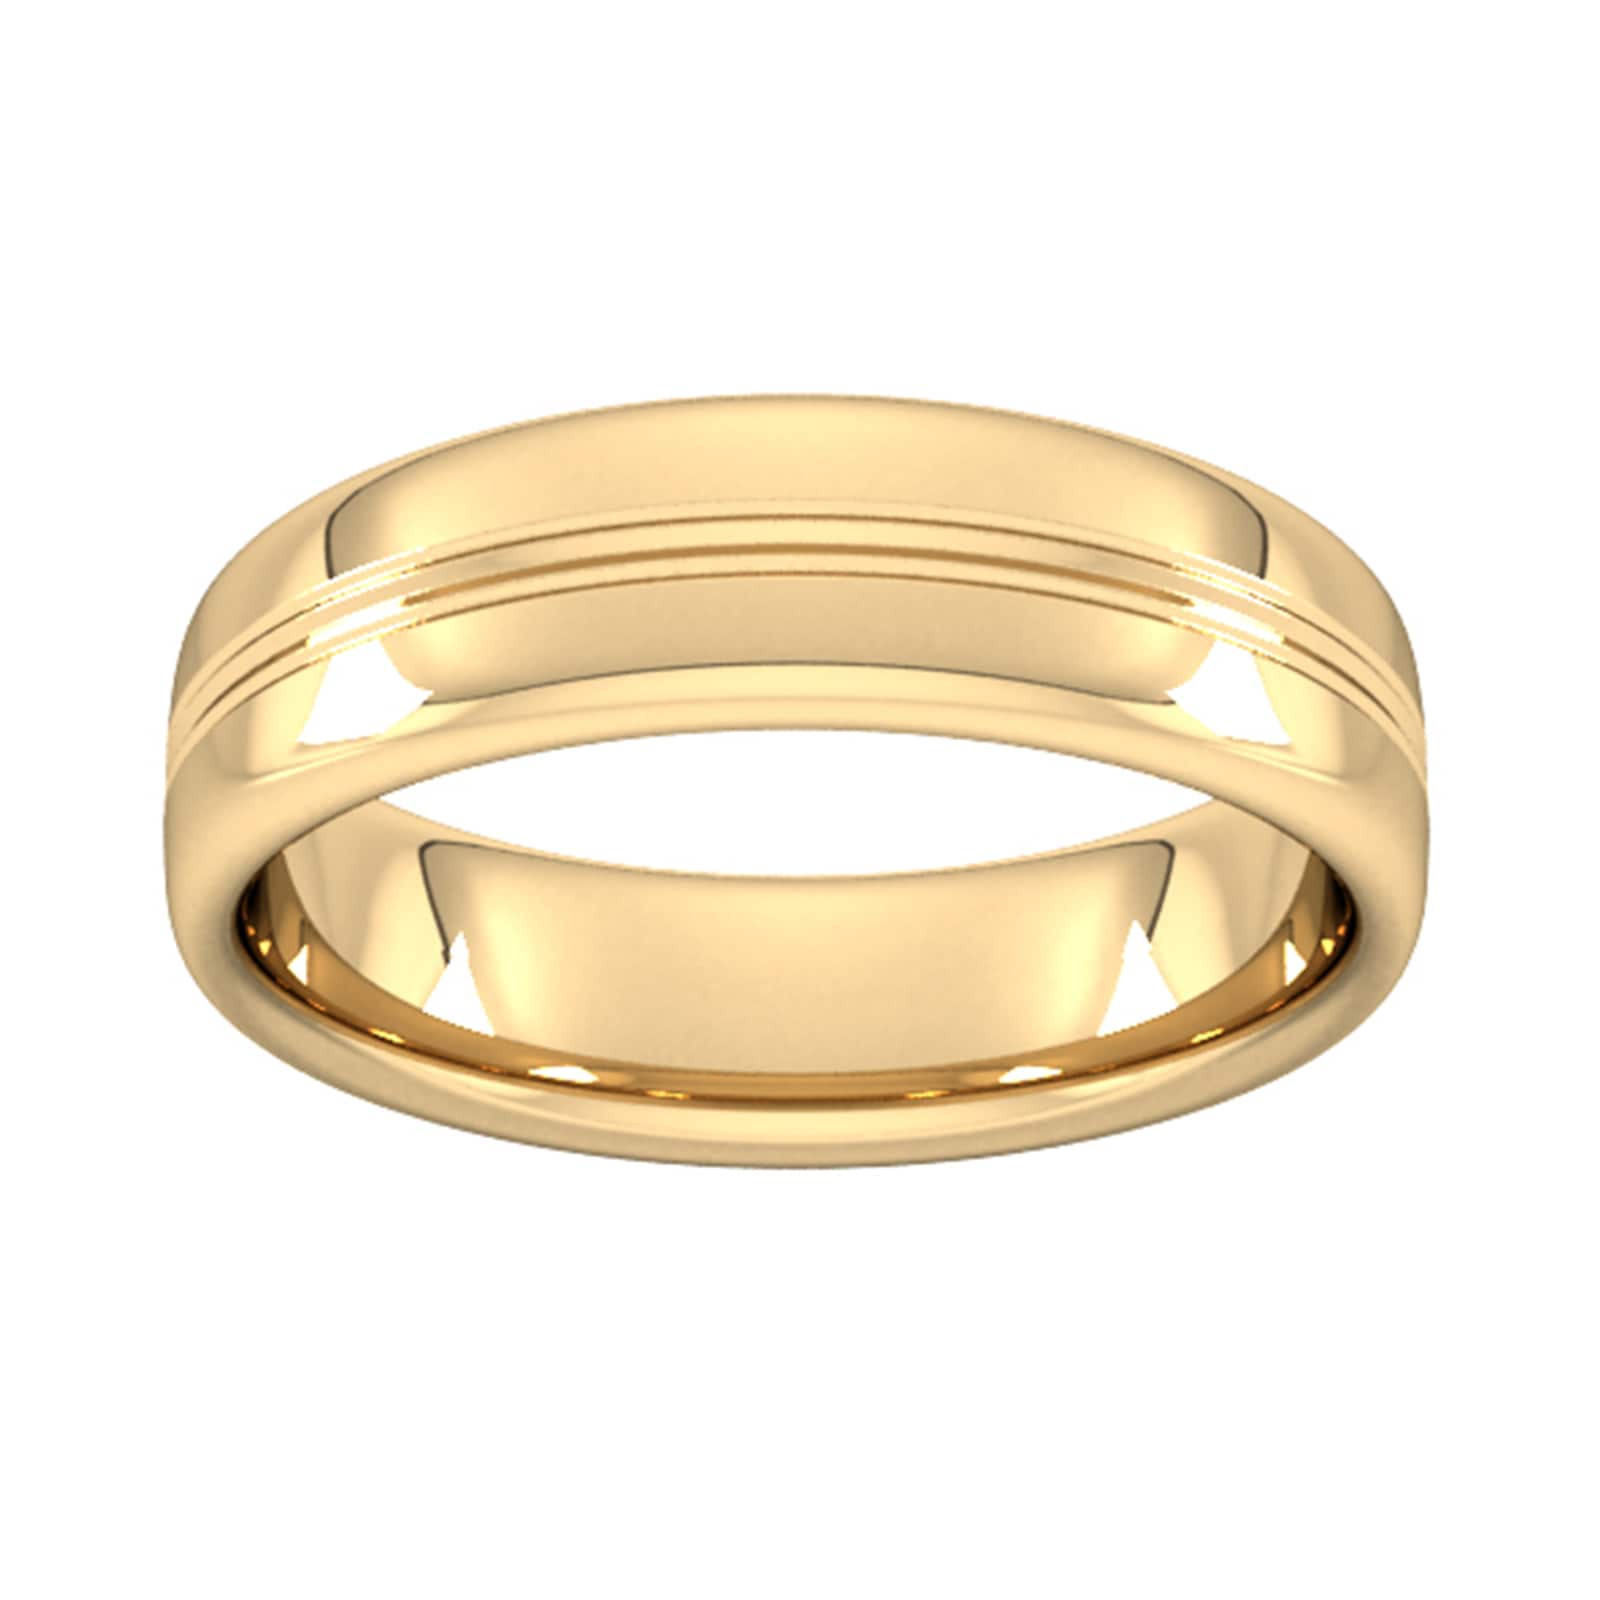 6mm Slight Court Standard Grooved Polished Finish Wedding Ring In 9 Carat Yellow Gold - Ring Size X